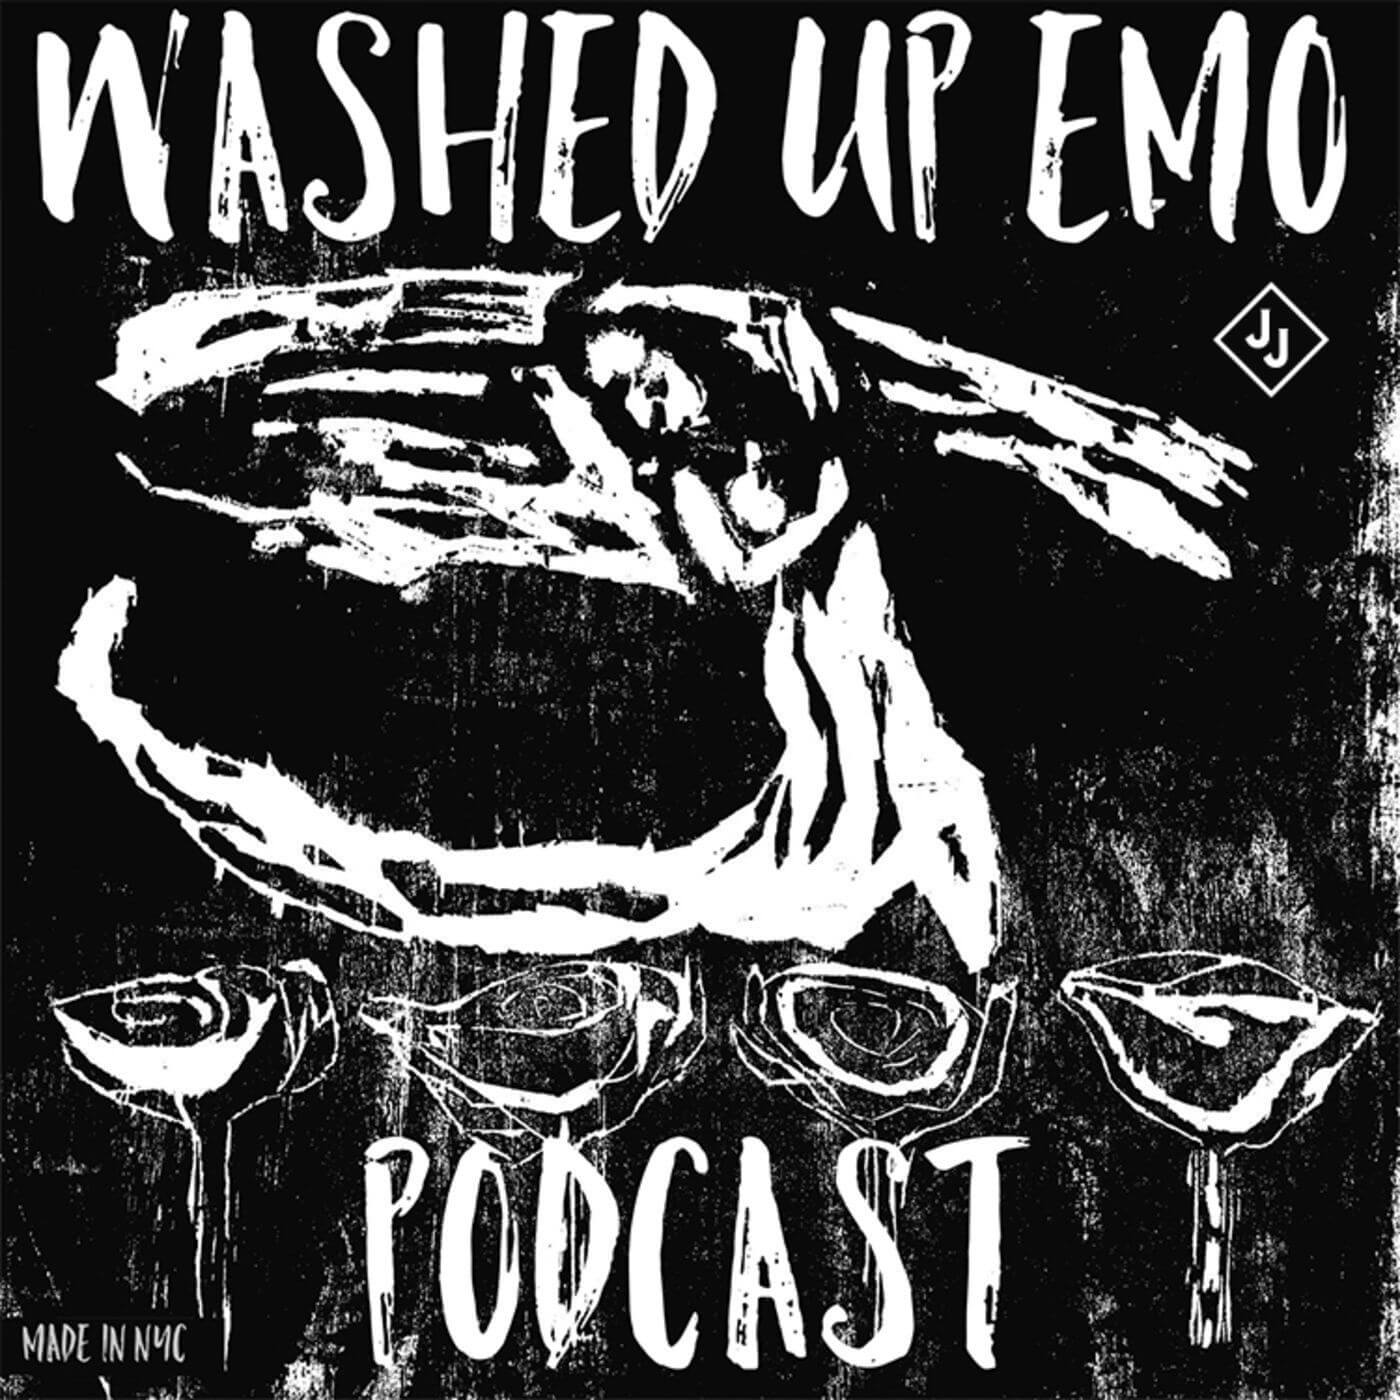 Washed Up Emo: A podcast that’s not just a phase, Mom!